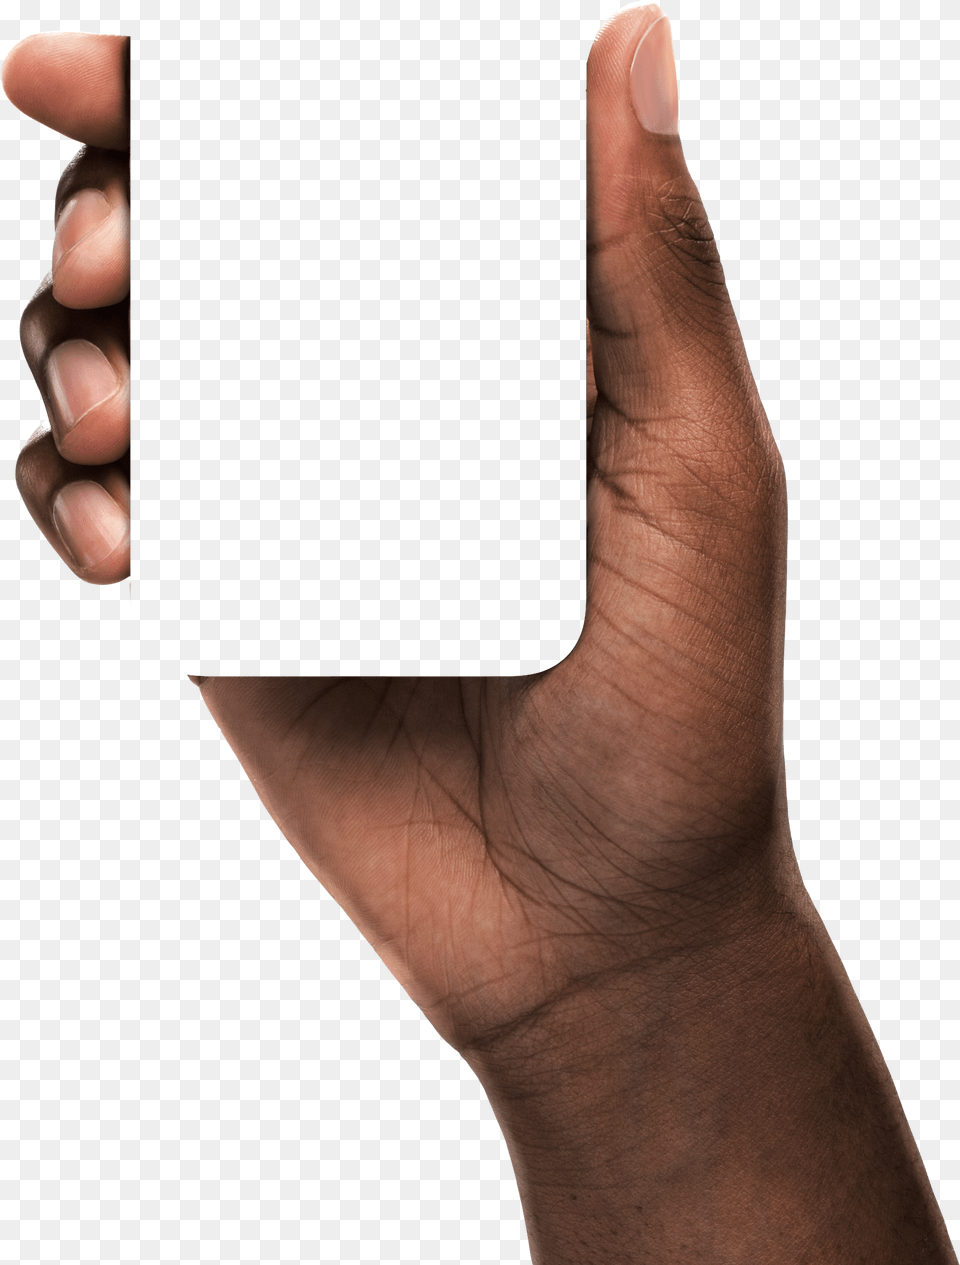 Flat Hand Mobile Shopping Gif Transparent Original Black Hand Holding Phone, Body Part, Finger, Person, Electronics Free Png